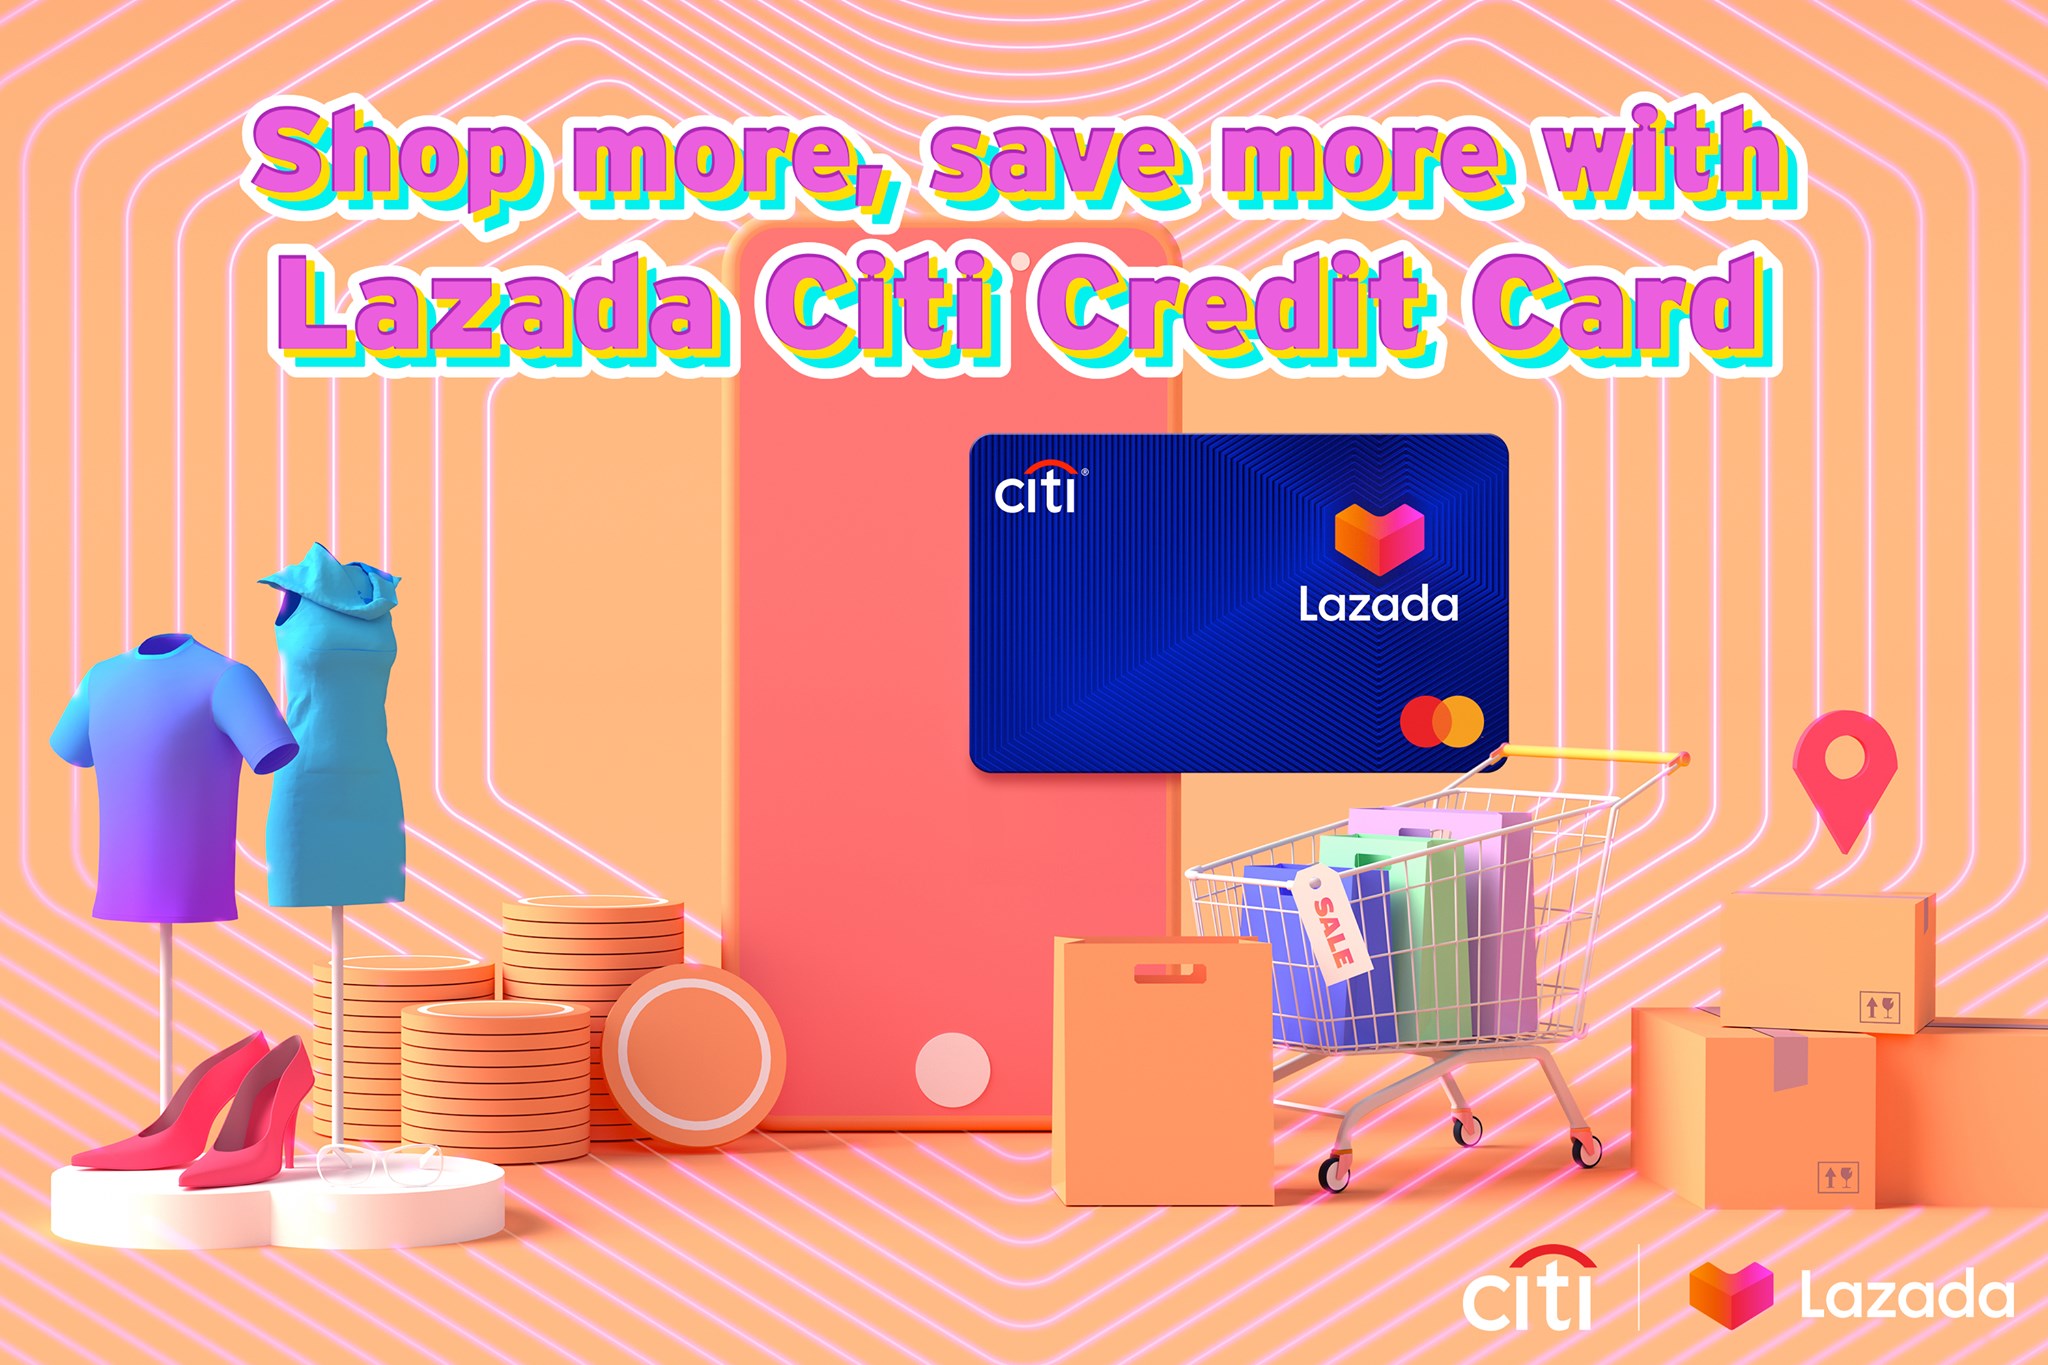 Image from Citibank Malaysia